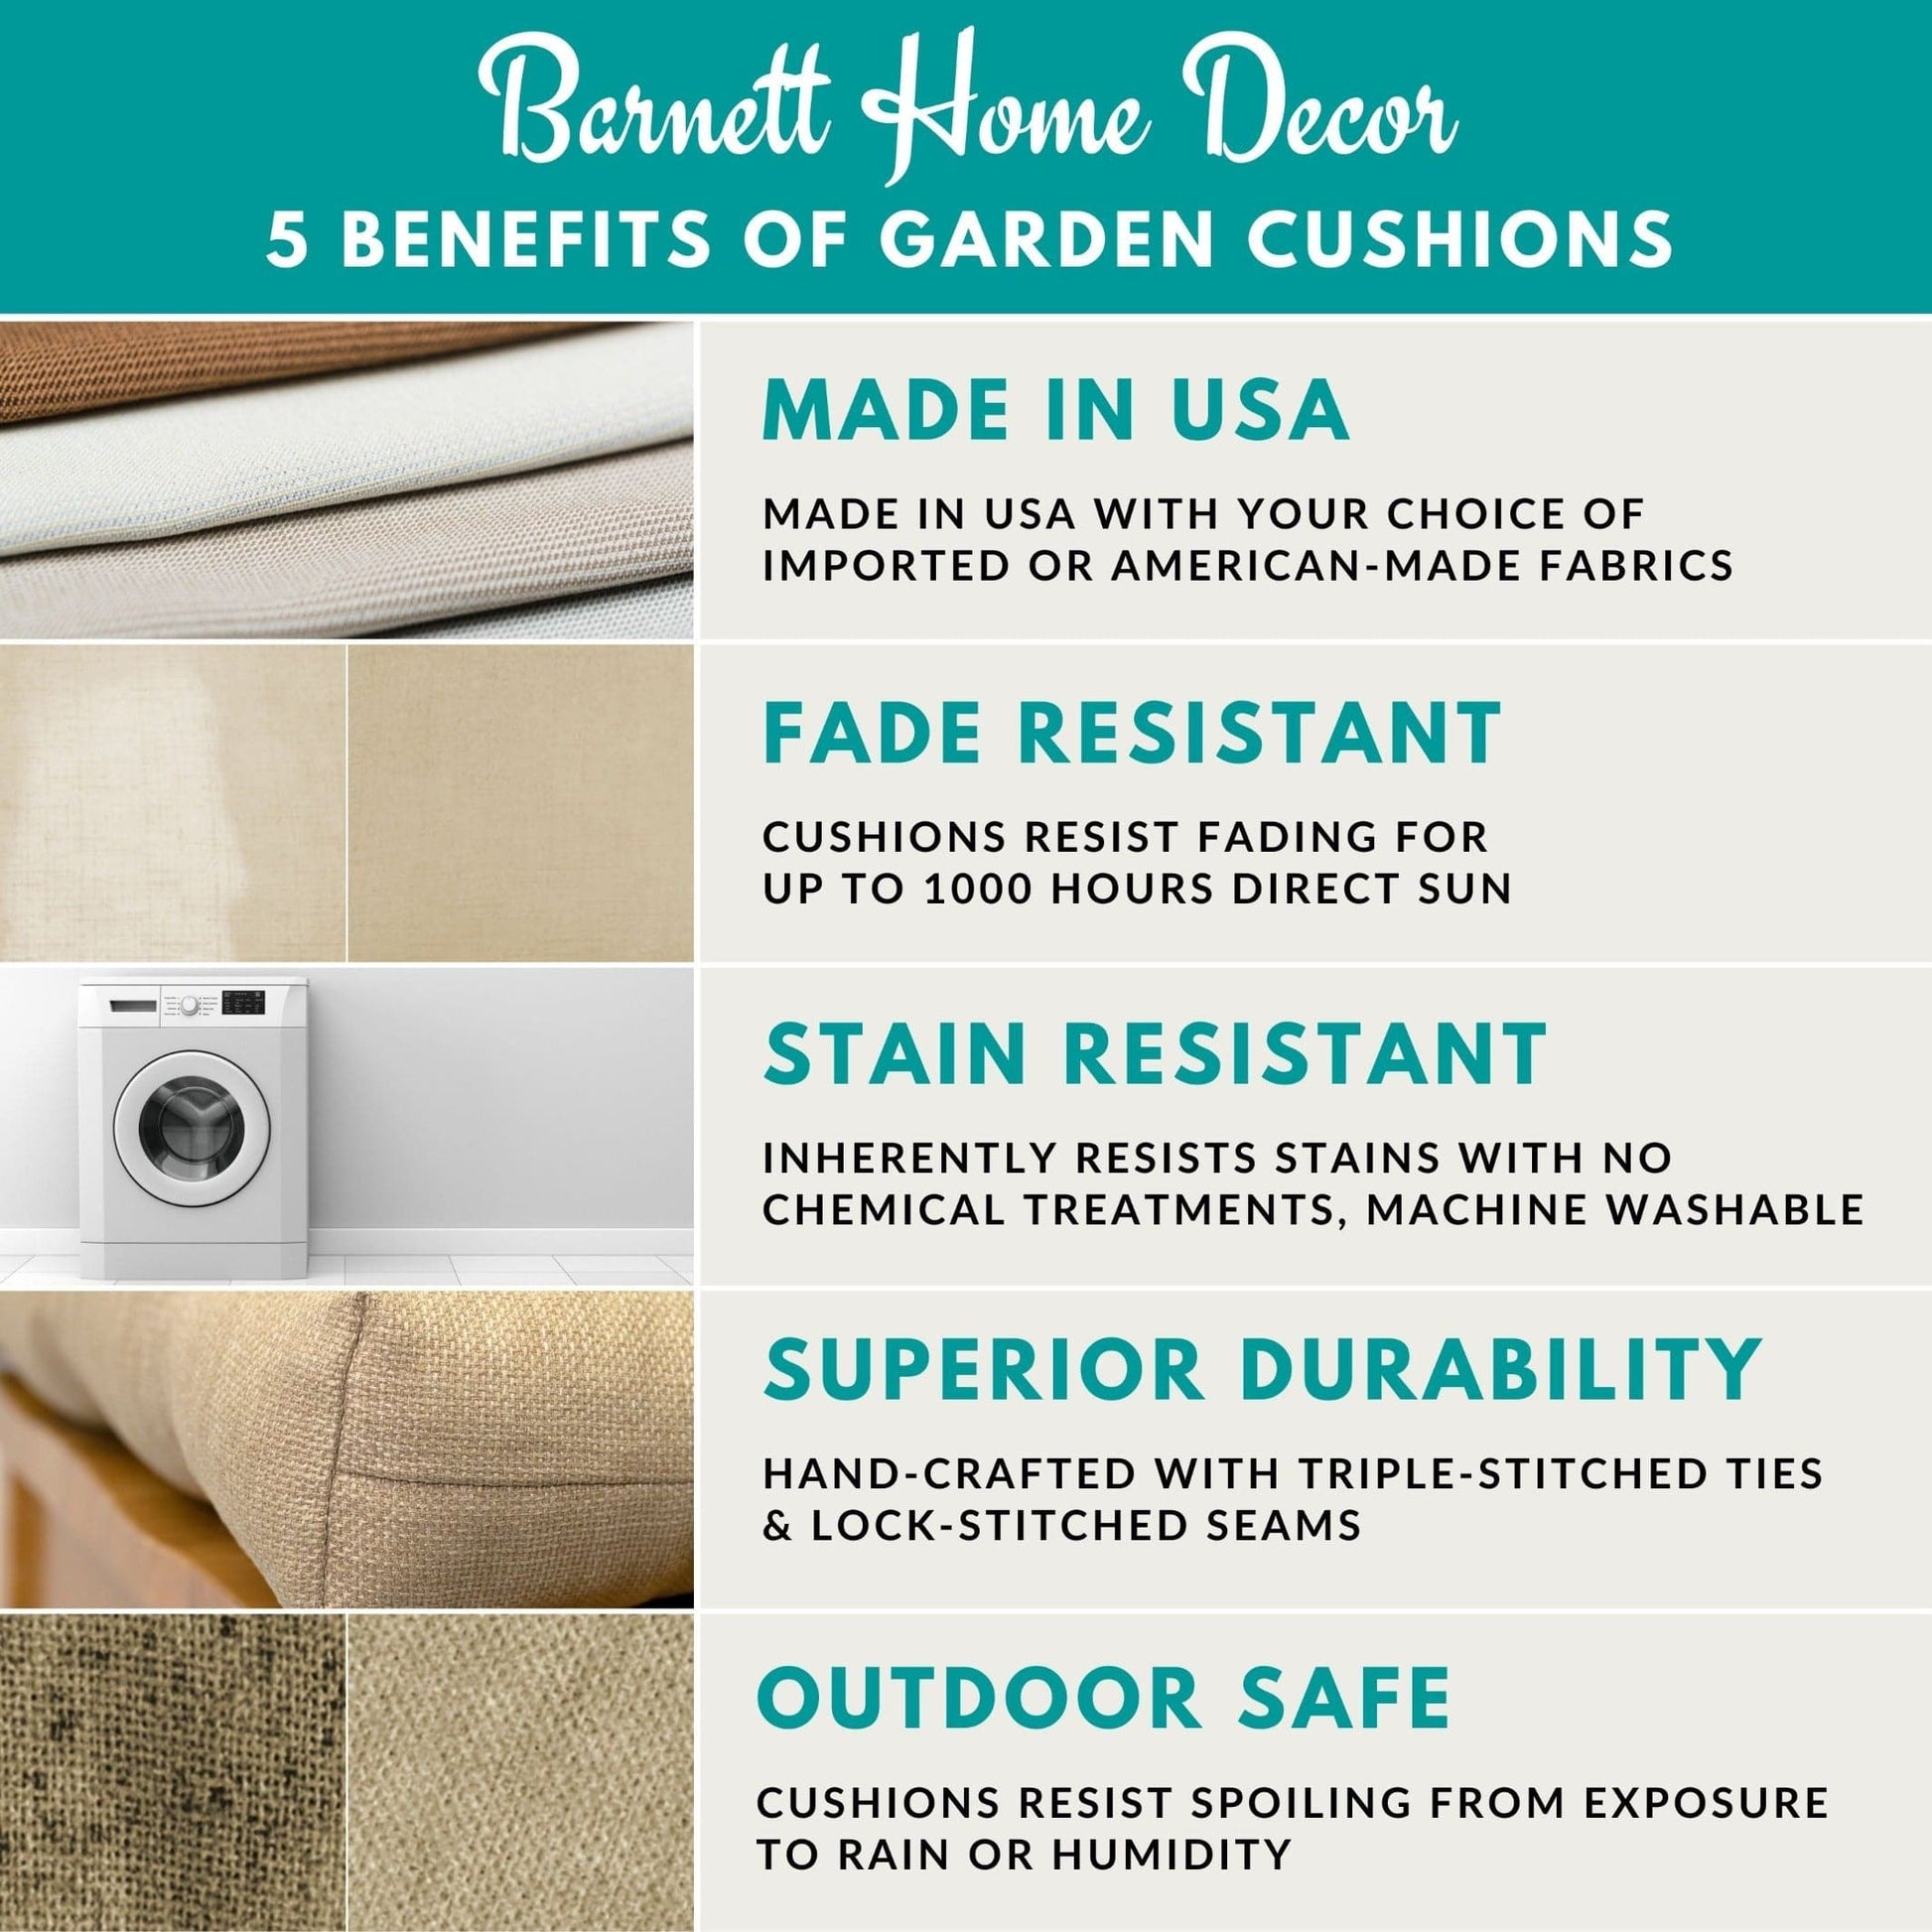 Barnett Home Decor - Top 5 Benefits of Garden Cushions - Made in USA - Fade Resistant - Stain Resistant - Superior Durability - Outdoor Safe